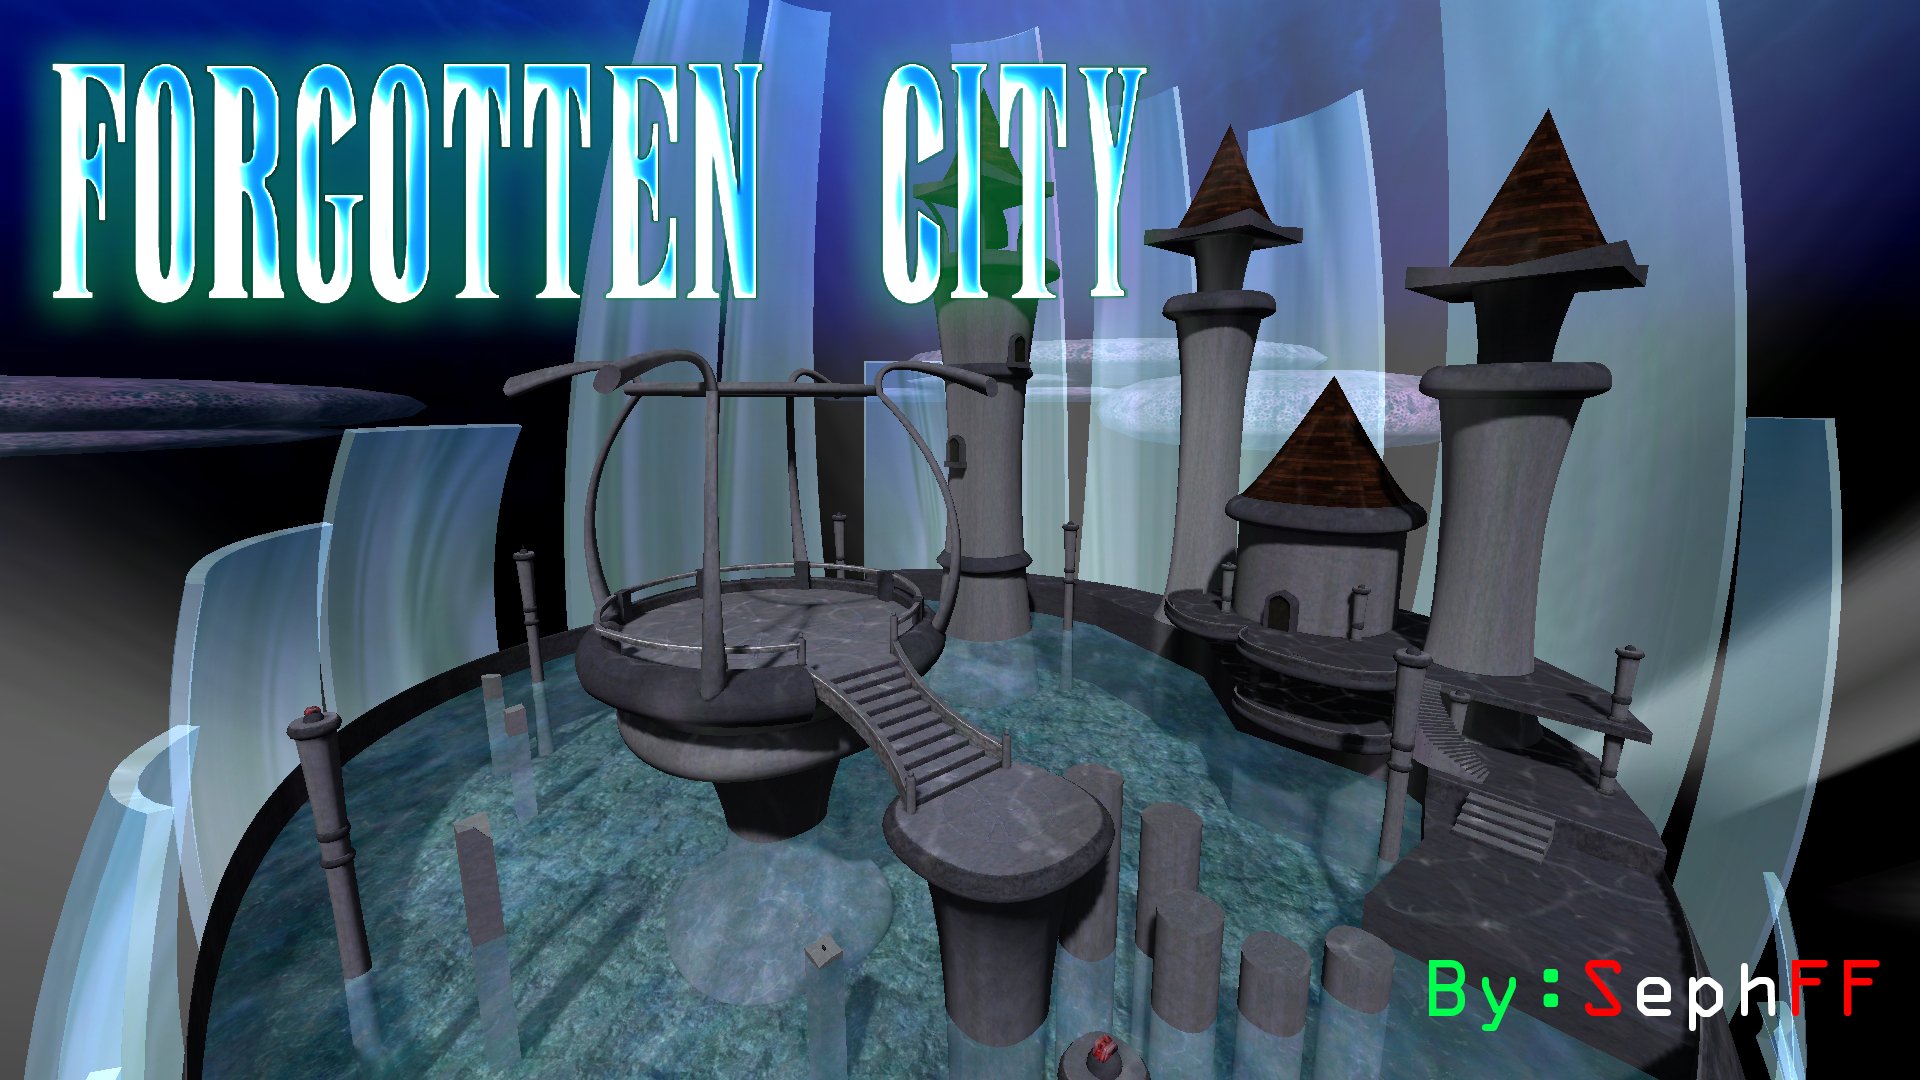 More information about "Forgotten_City"